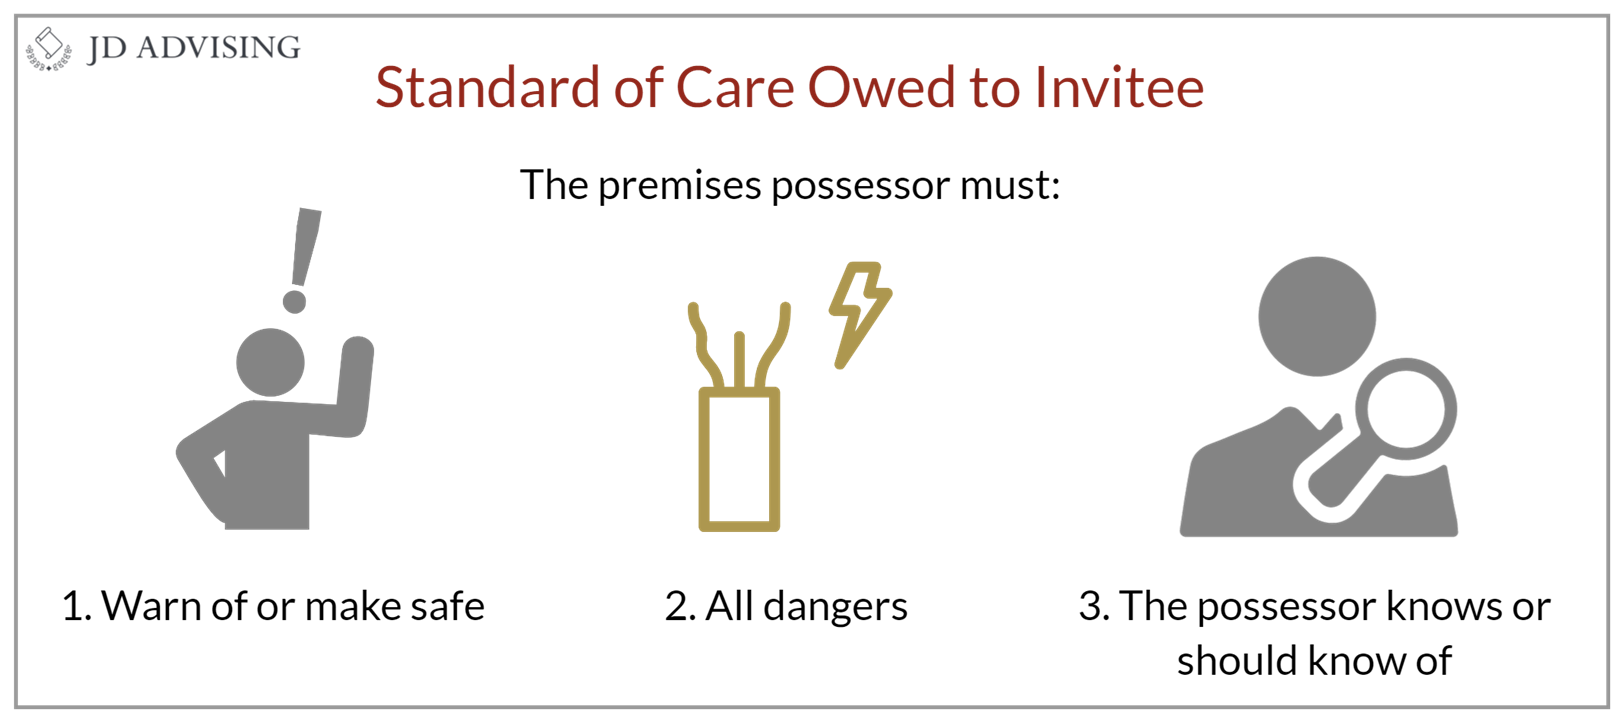 Standard of Care Owed to Invitee